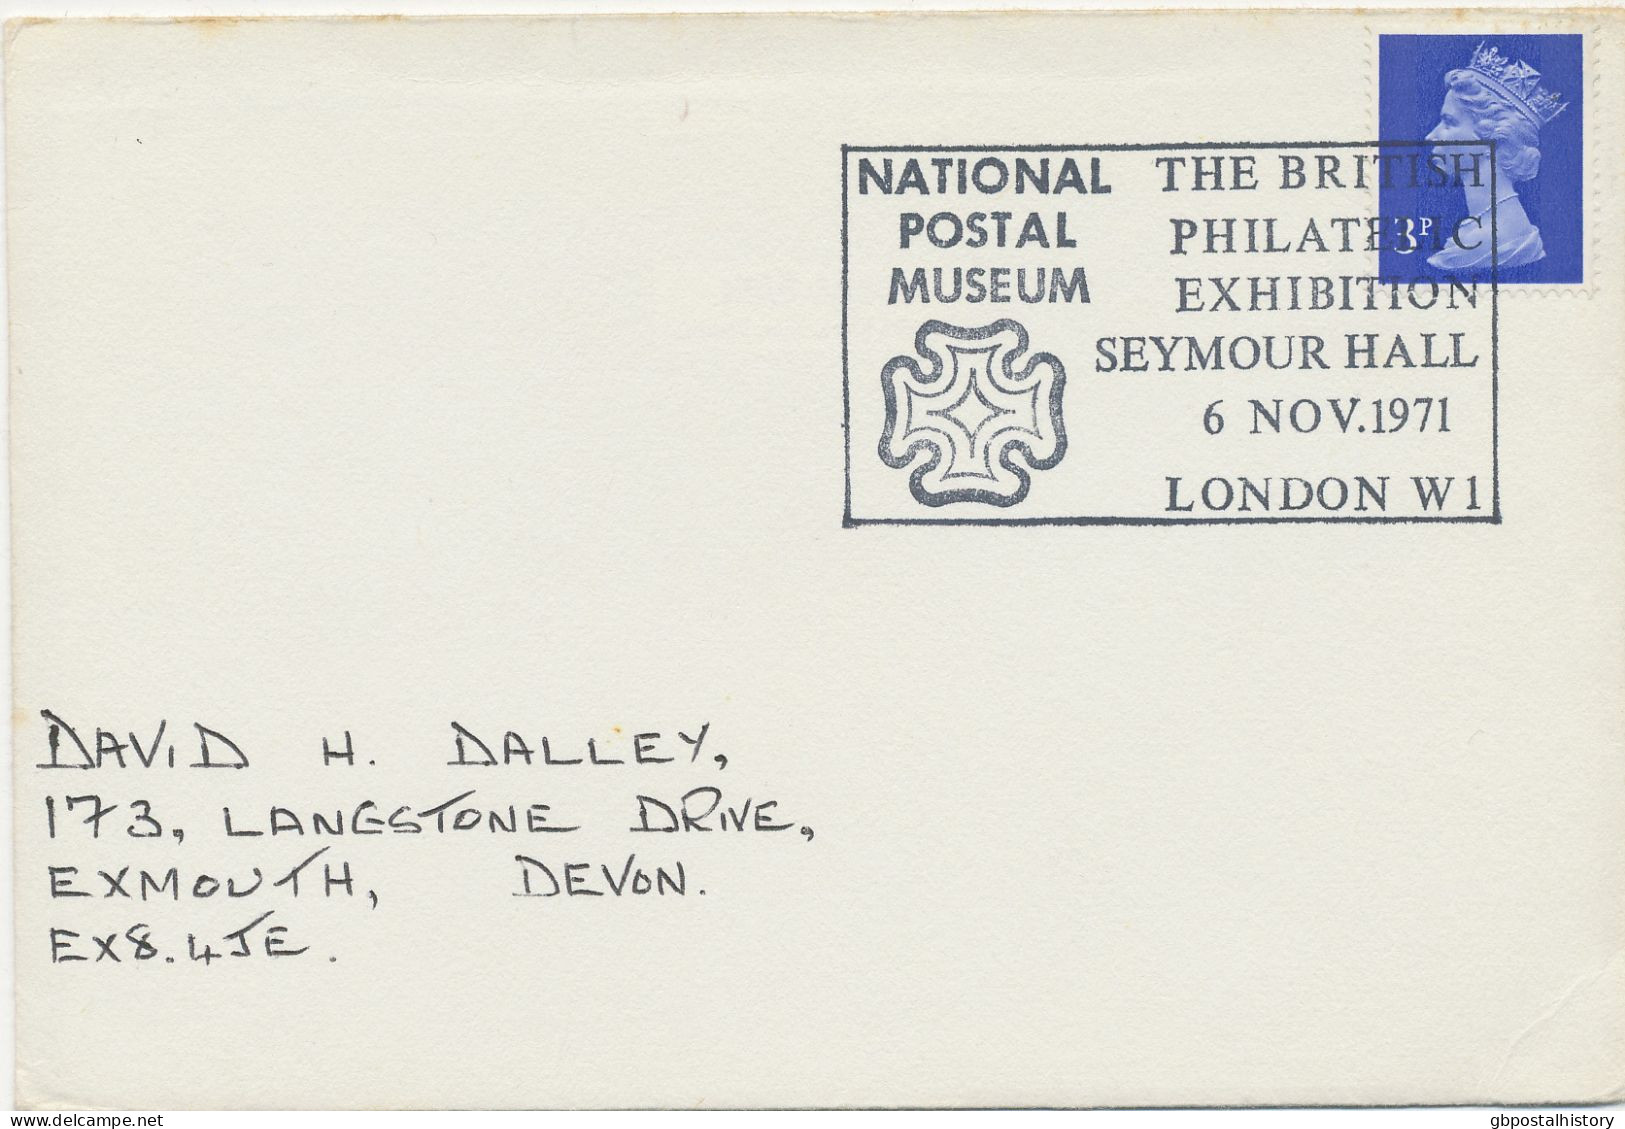 GB SPECIAL EVENT POSTMARKS 1971 THE BRITISH PHILATELIC EXHIBITION SEYMOUR HALL LONDON W.I. - NATIONAL POSTAL MUSEUM - Covers & Documents